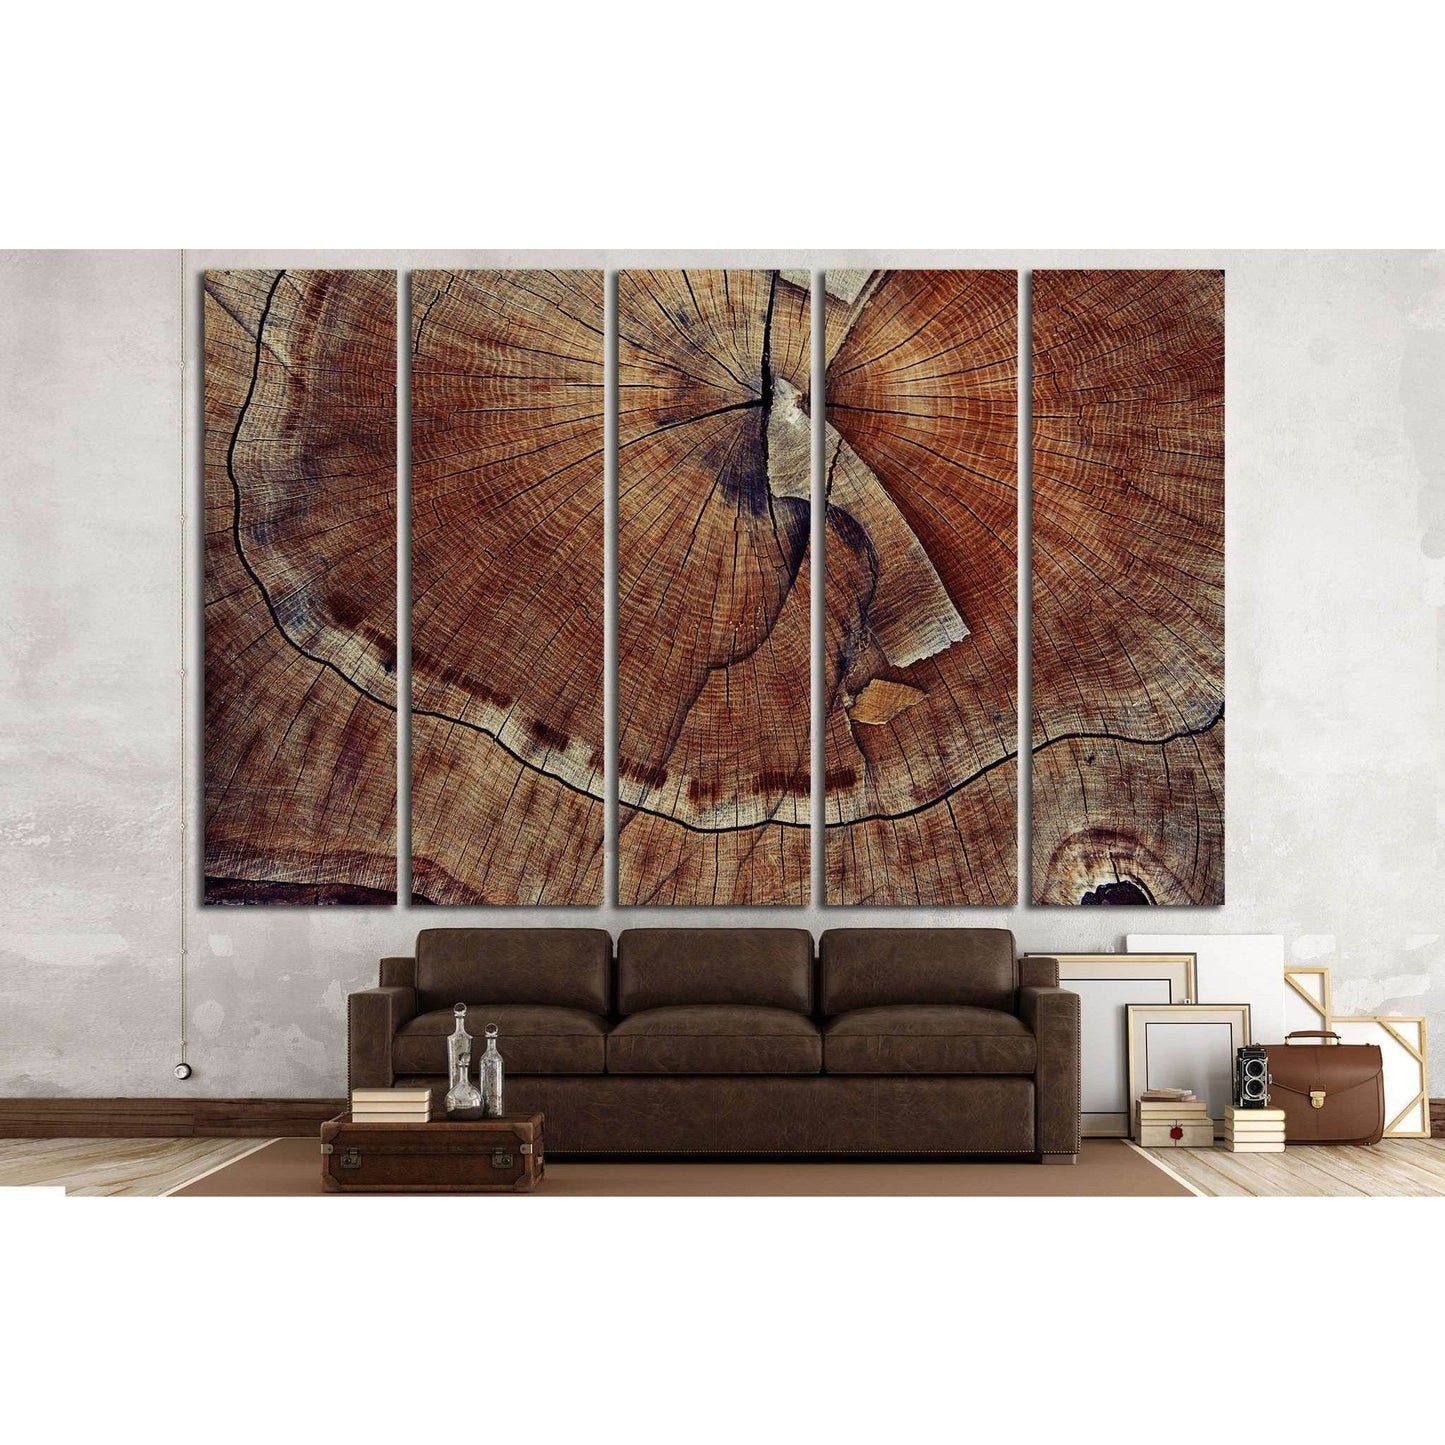 Tree Ring Detail Canvas Print for Rustic Home DecorThis canvas print features a close-up of a tree's annual rings, offering a detailed and natural texture that would add an earthy and organic element to spaces such as a study, library, or any area with a